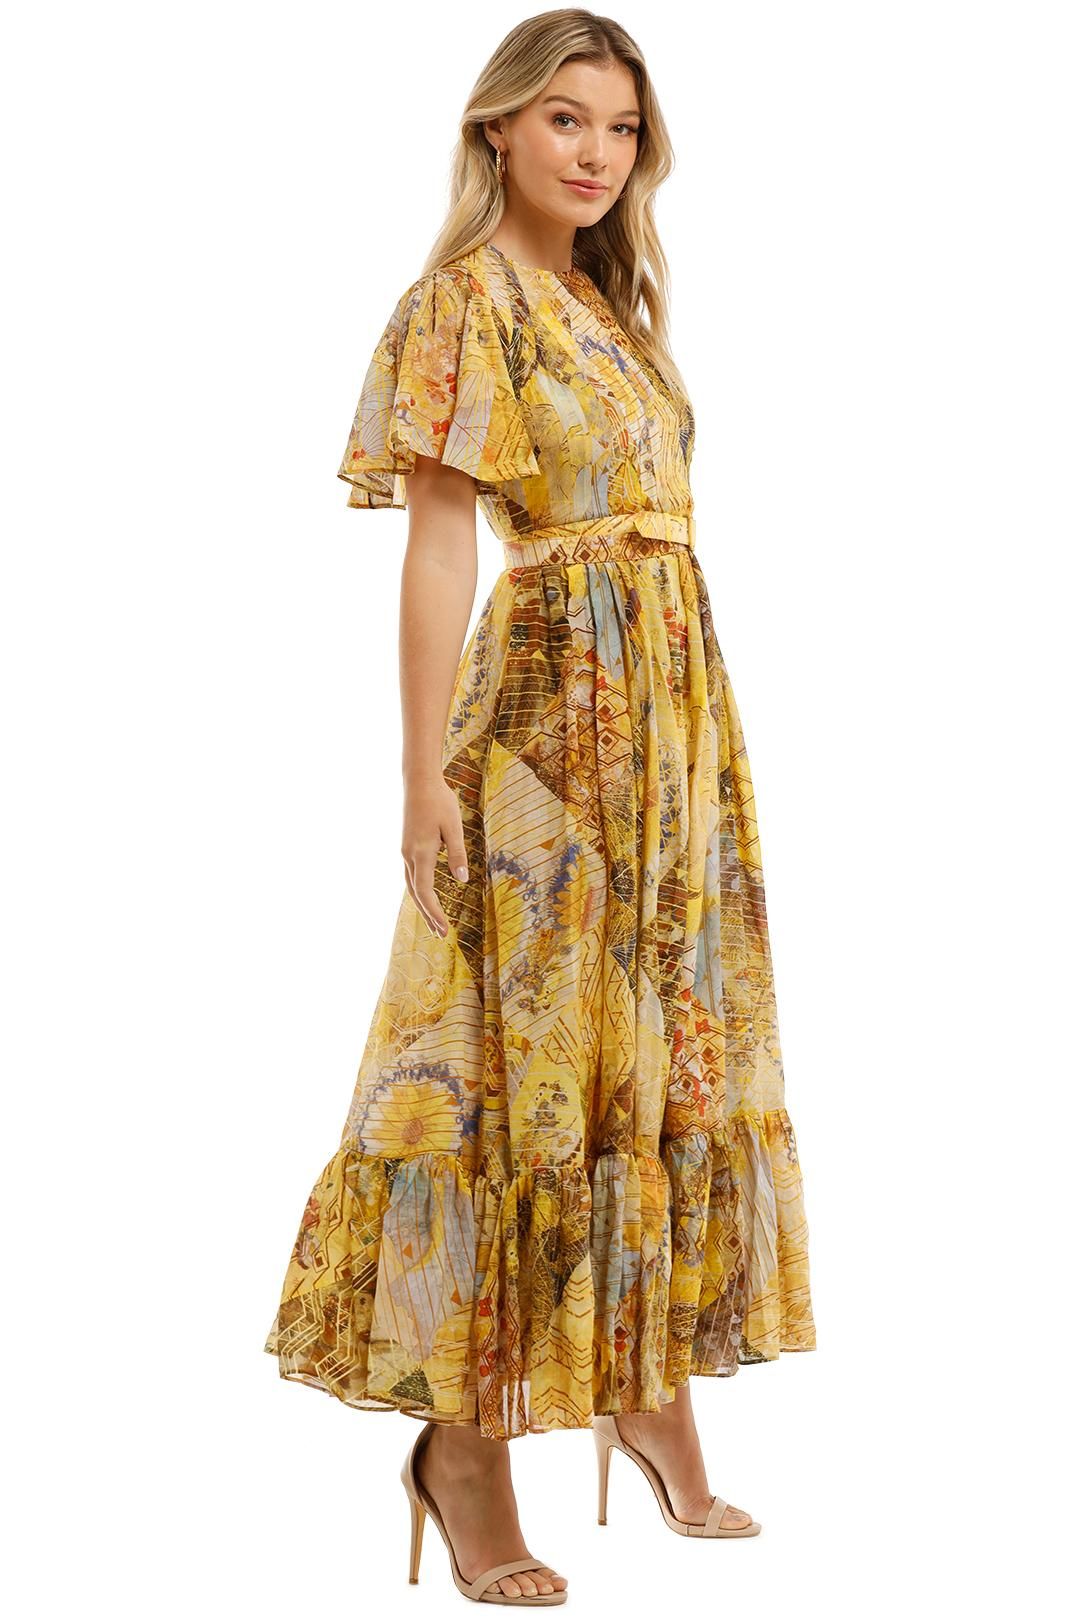 Leo and Lin Illusory Silk Cotton Dress Maxi Print Belted